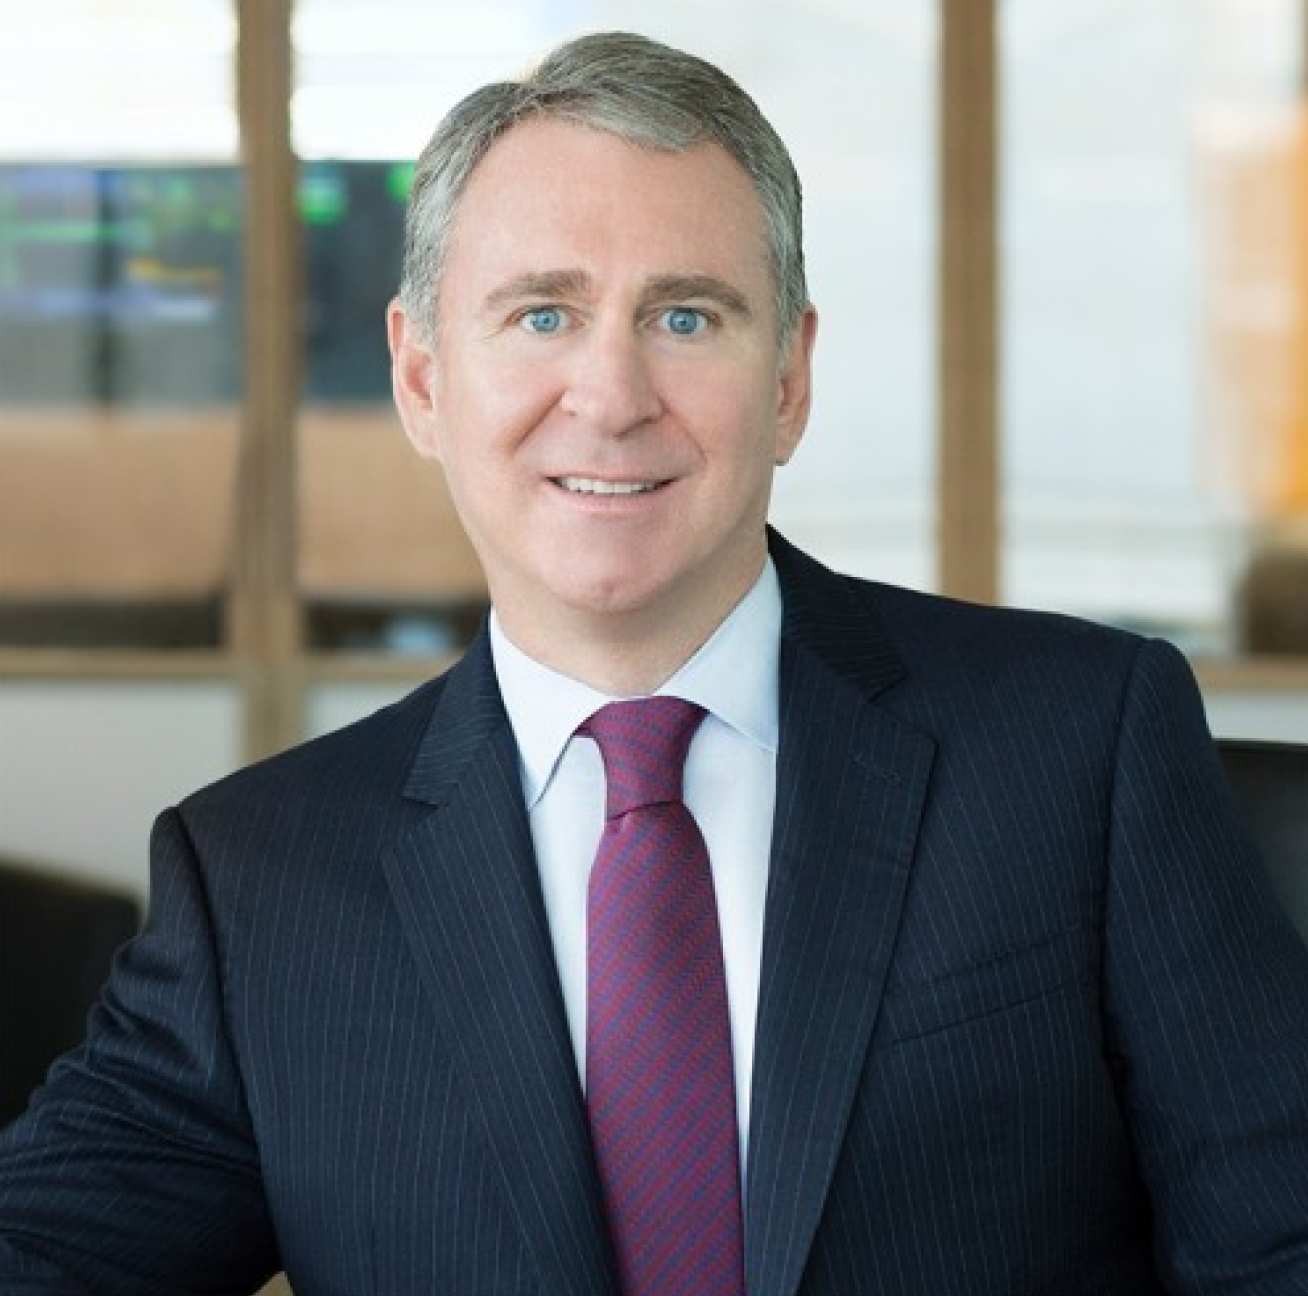 Kenneth Griffin, Founder and CEO of Citadel